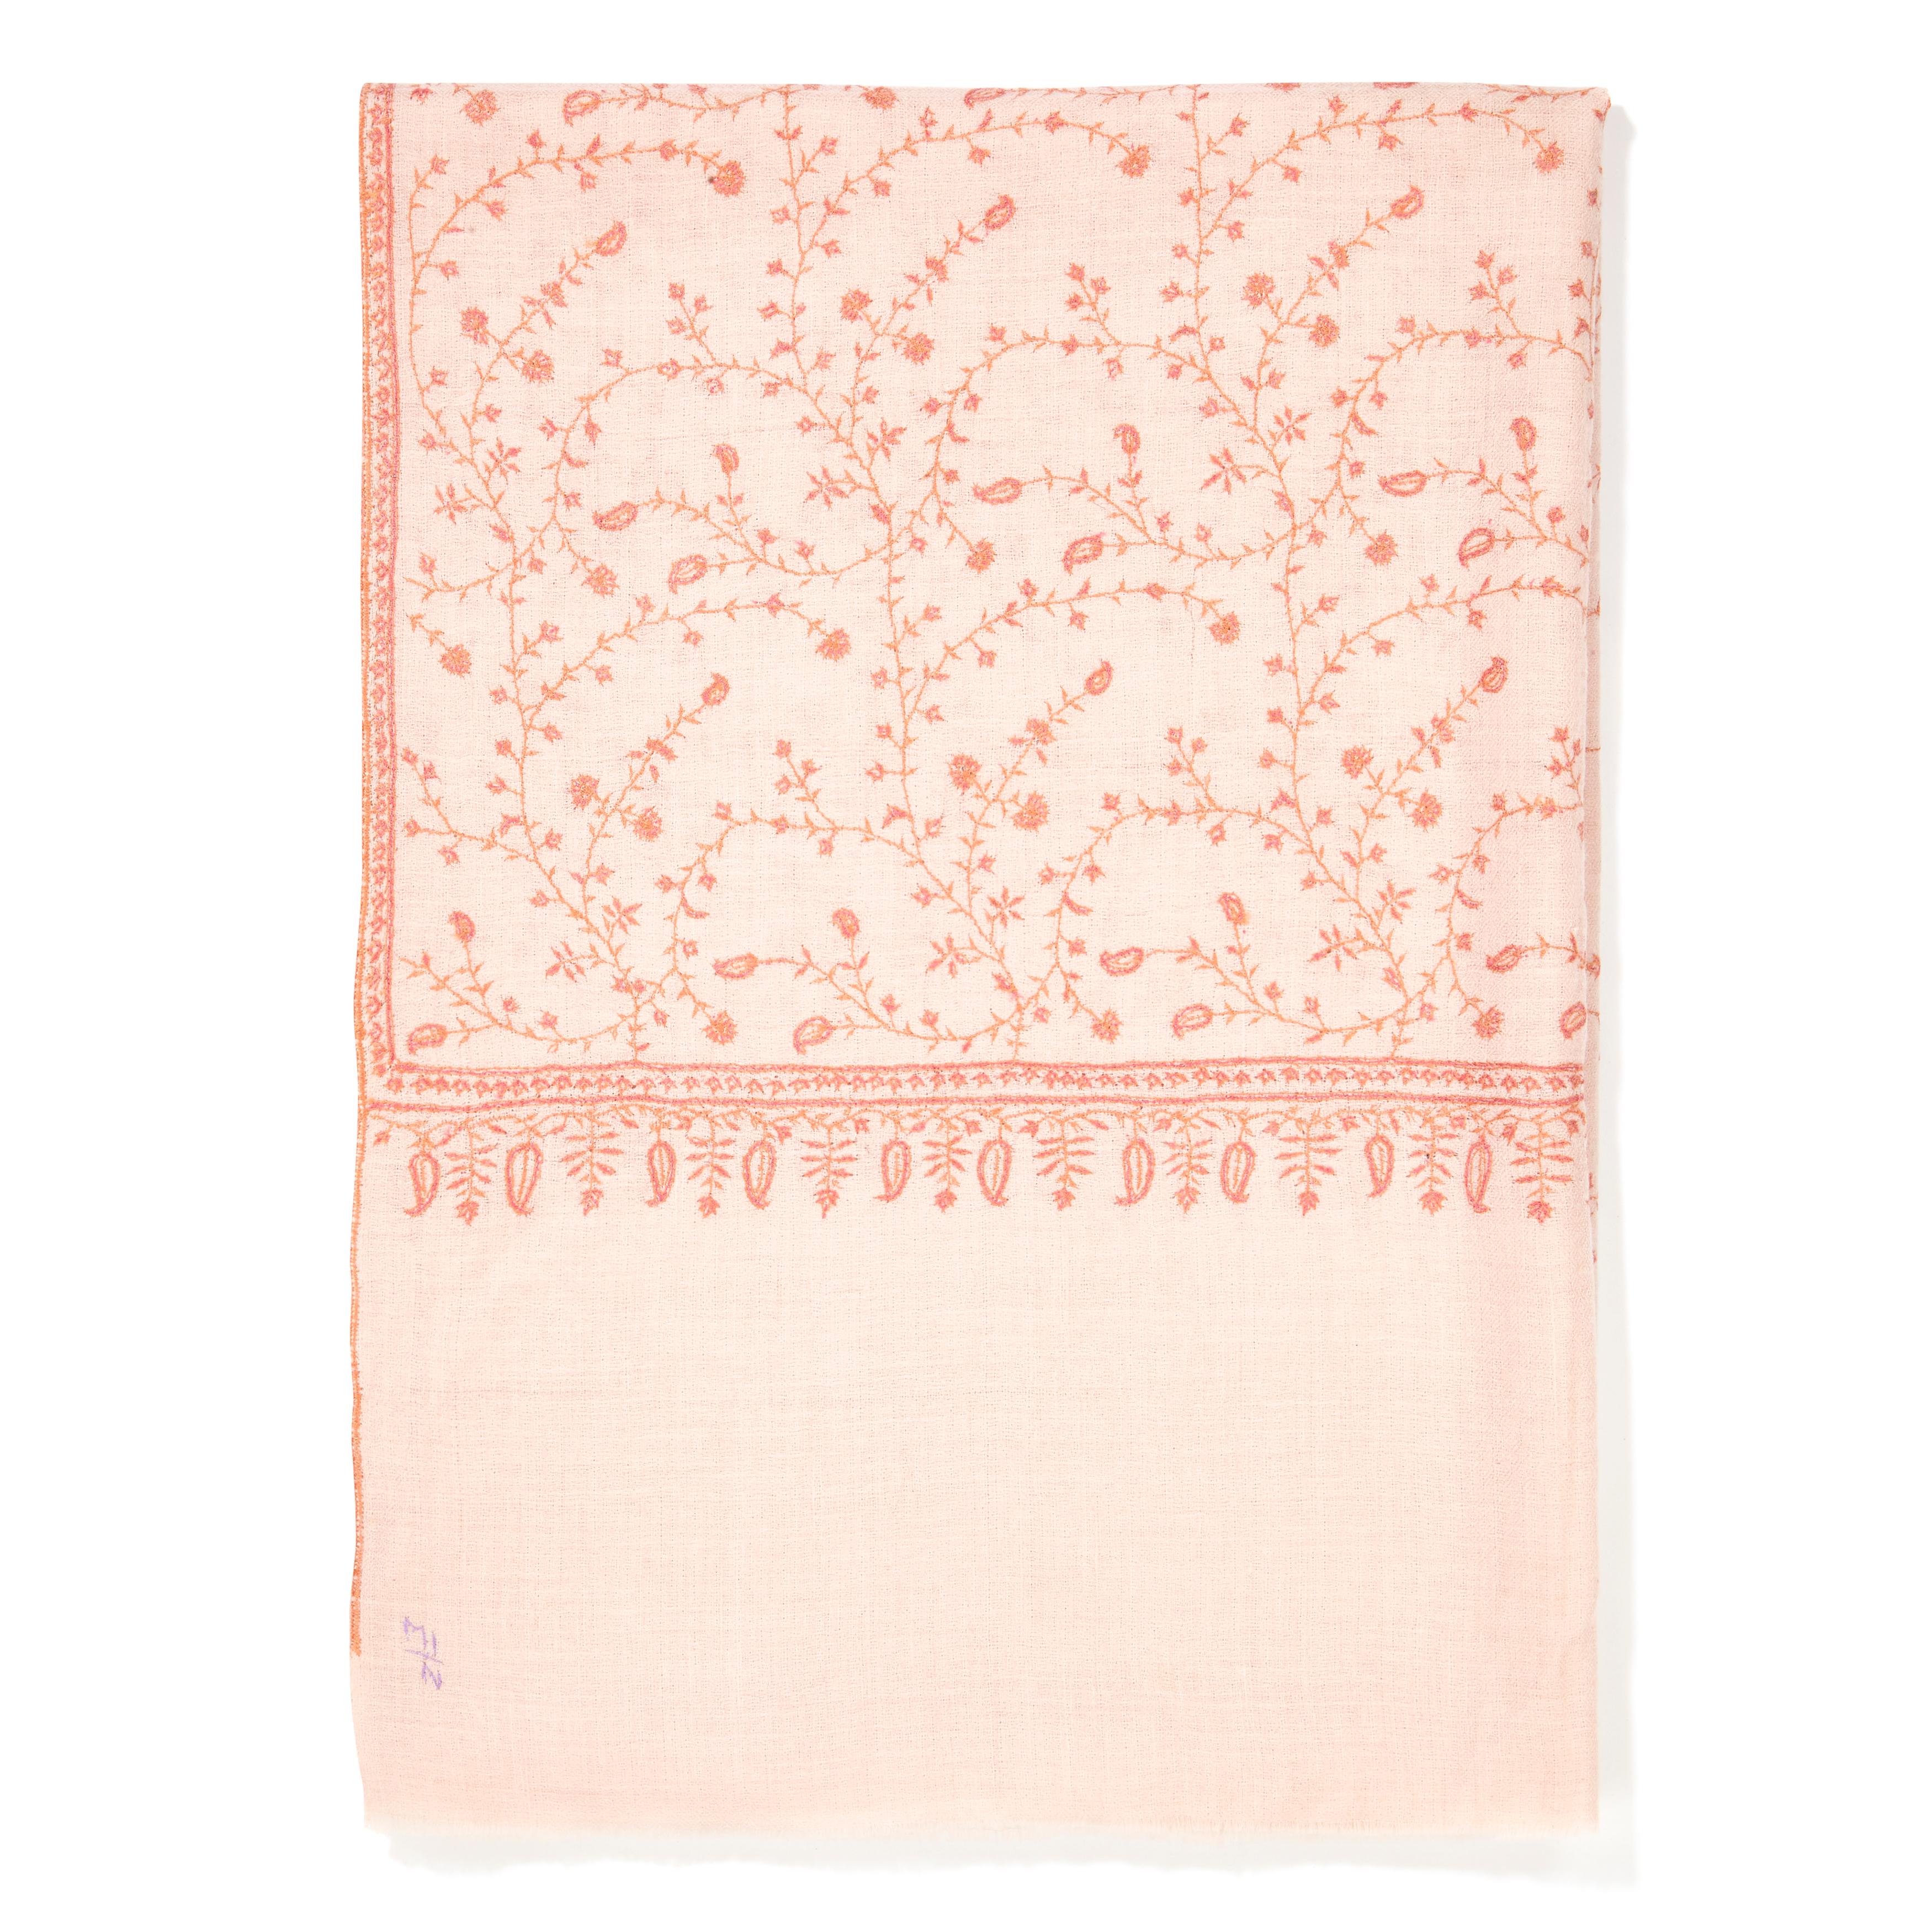 Hand Embroidered Pale Pink 100% Cashmere Shawl Scarf from Kashmir 

The perfect Christmas gift for someone special - this shawl is a unique one of a kind piece and handmade. 
Verheyen London’s shawl is spun from the finest embroidered woven cashmere